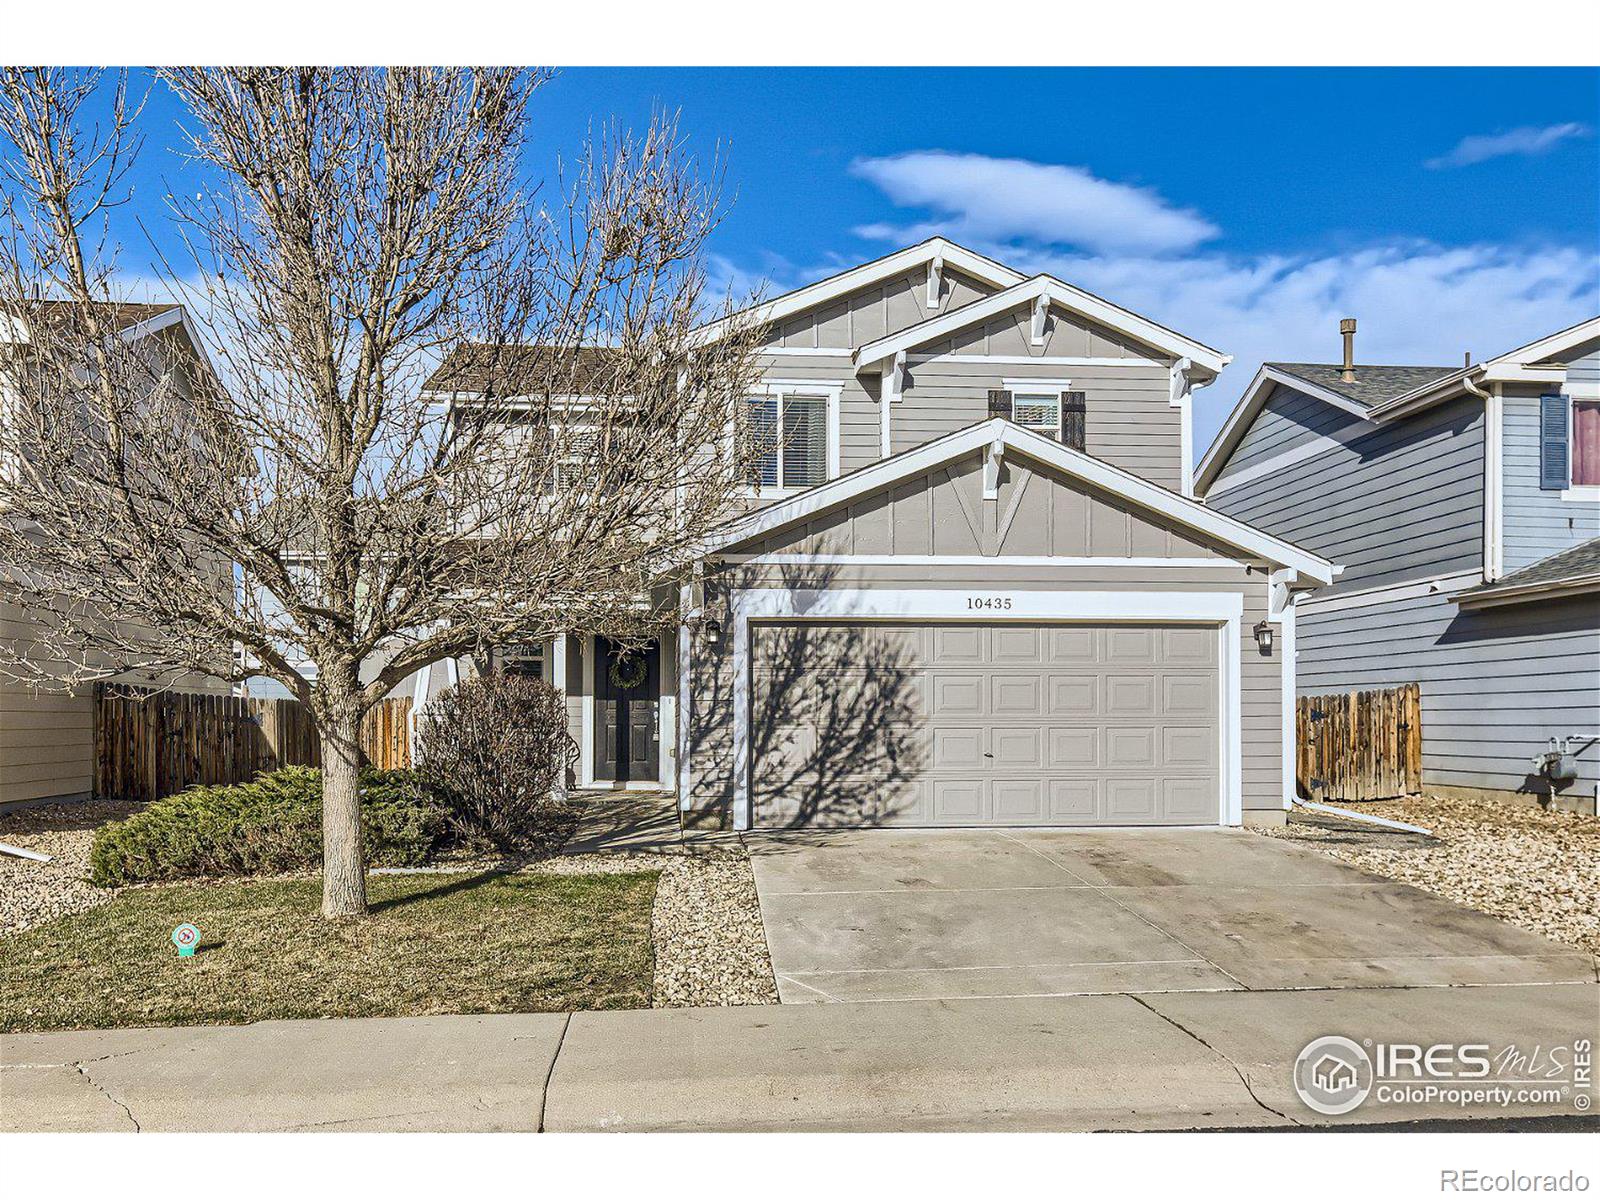 10435  butte drive, longmont sold home. Closed on 2024-02-16 for $447,500.